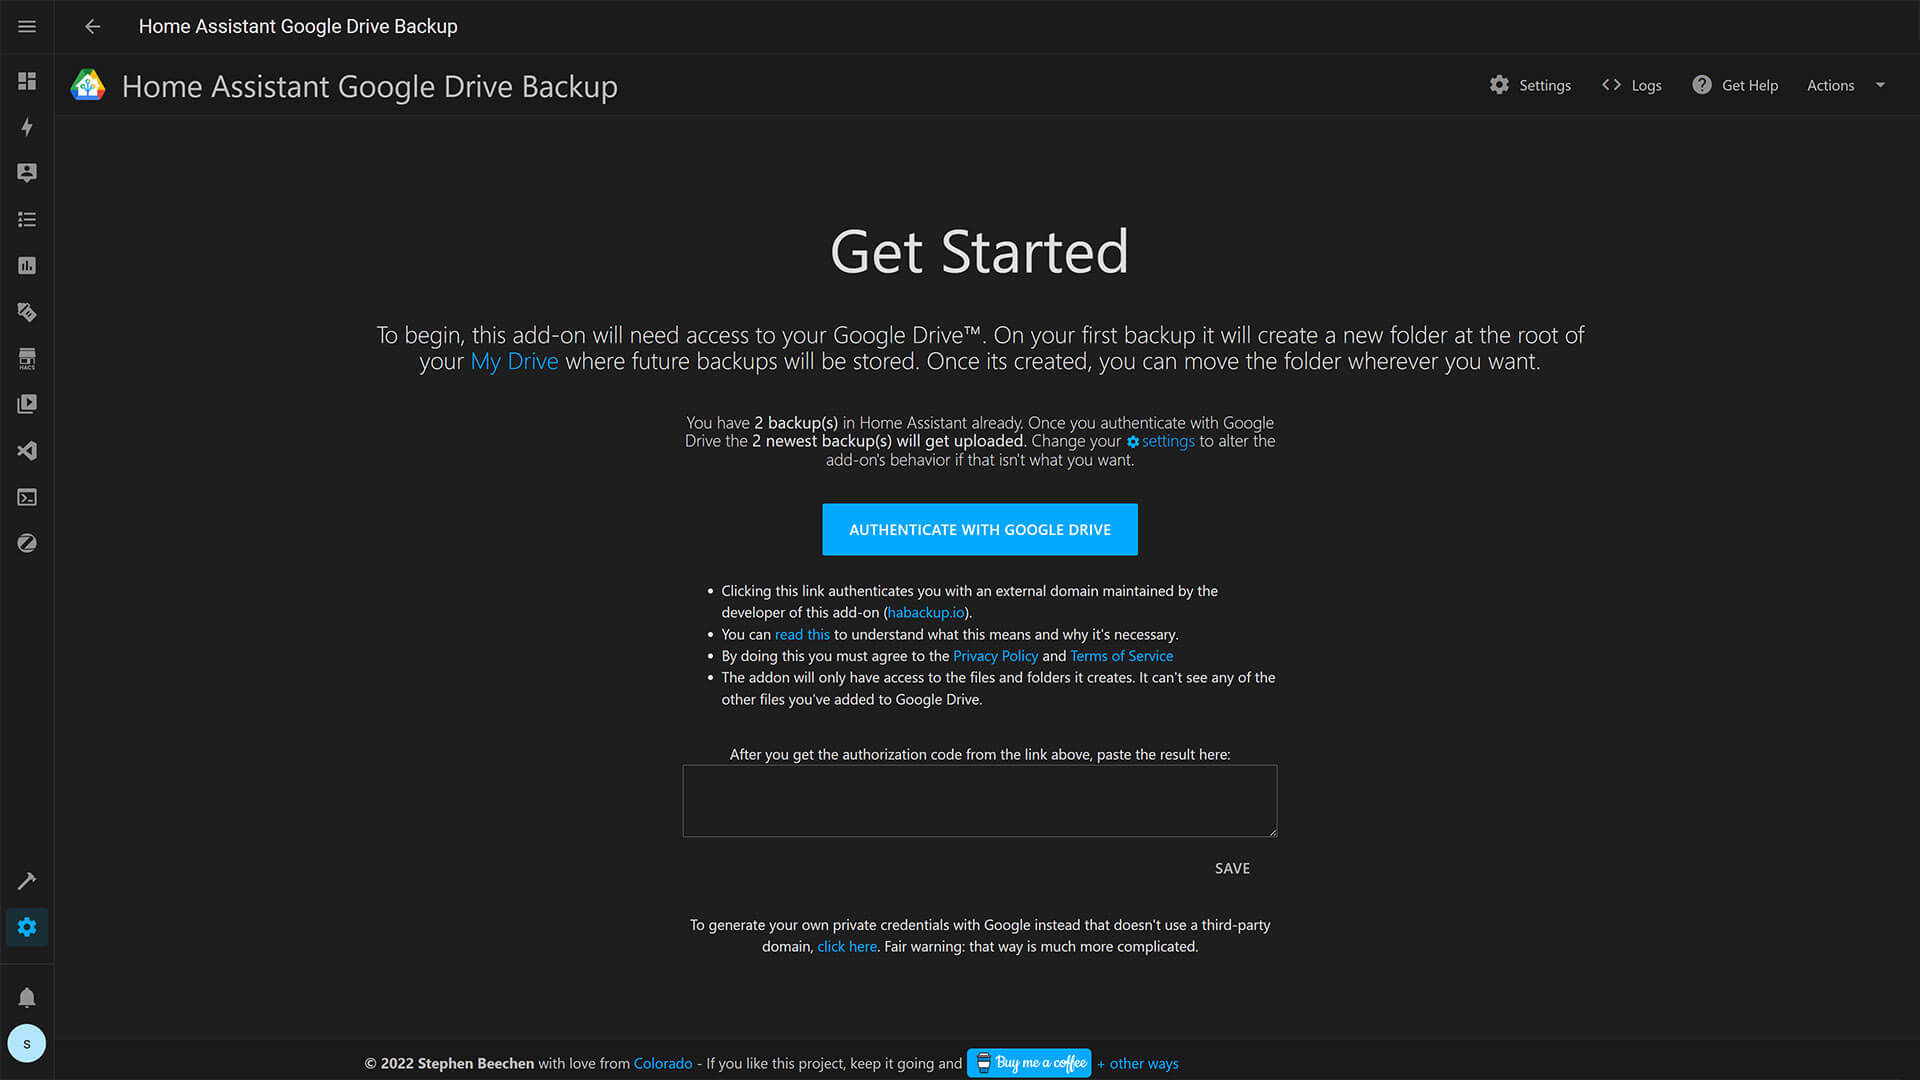 Home Assistant Google Drive Backup Add-on Welcome Screen